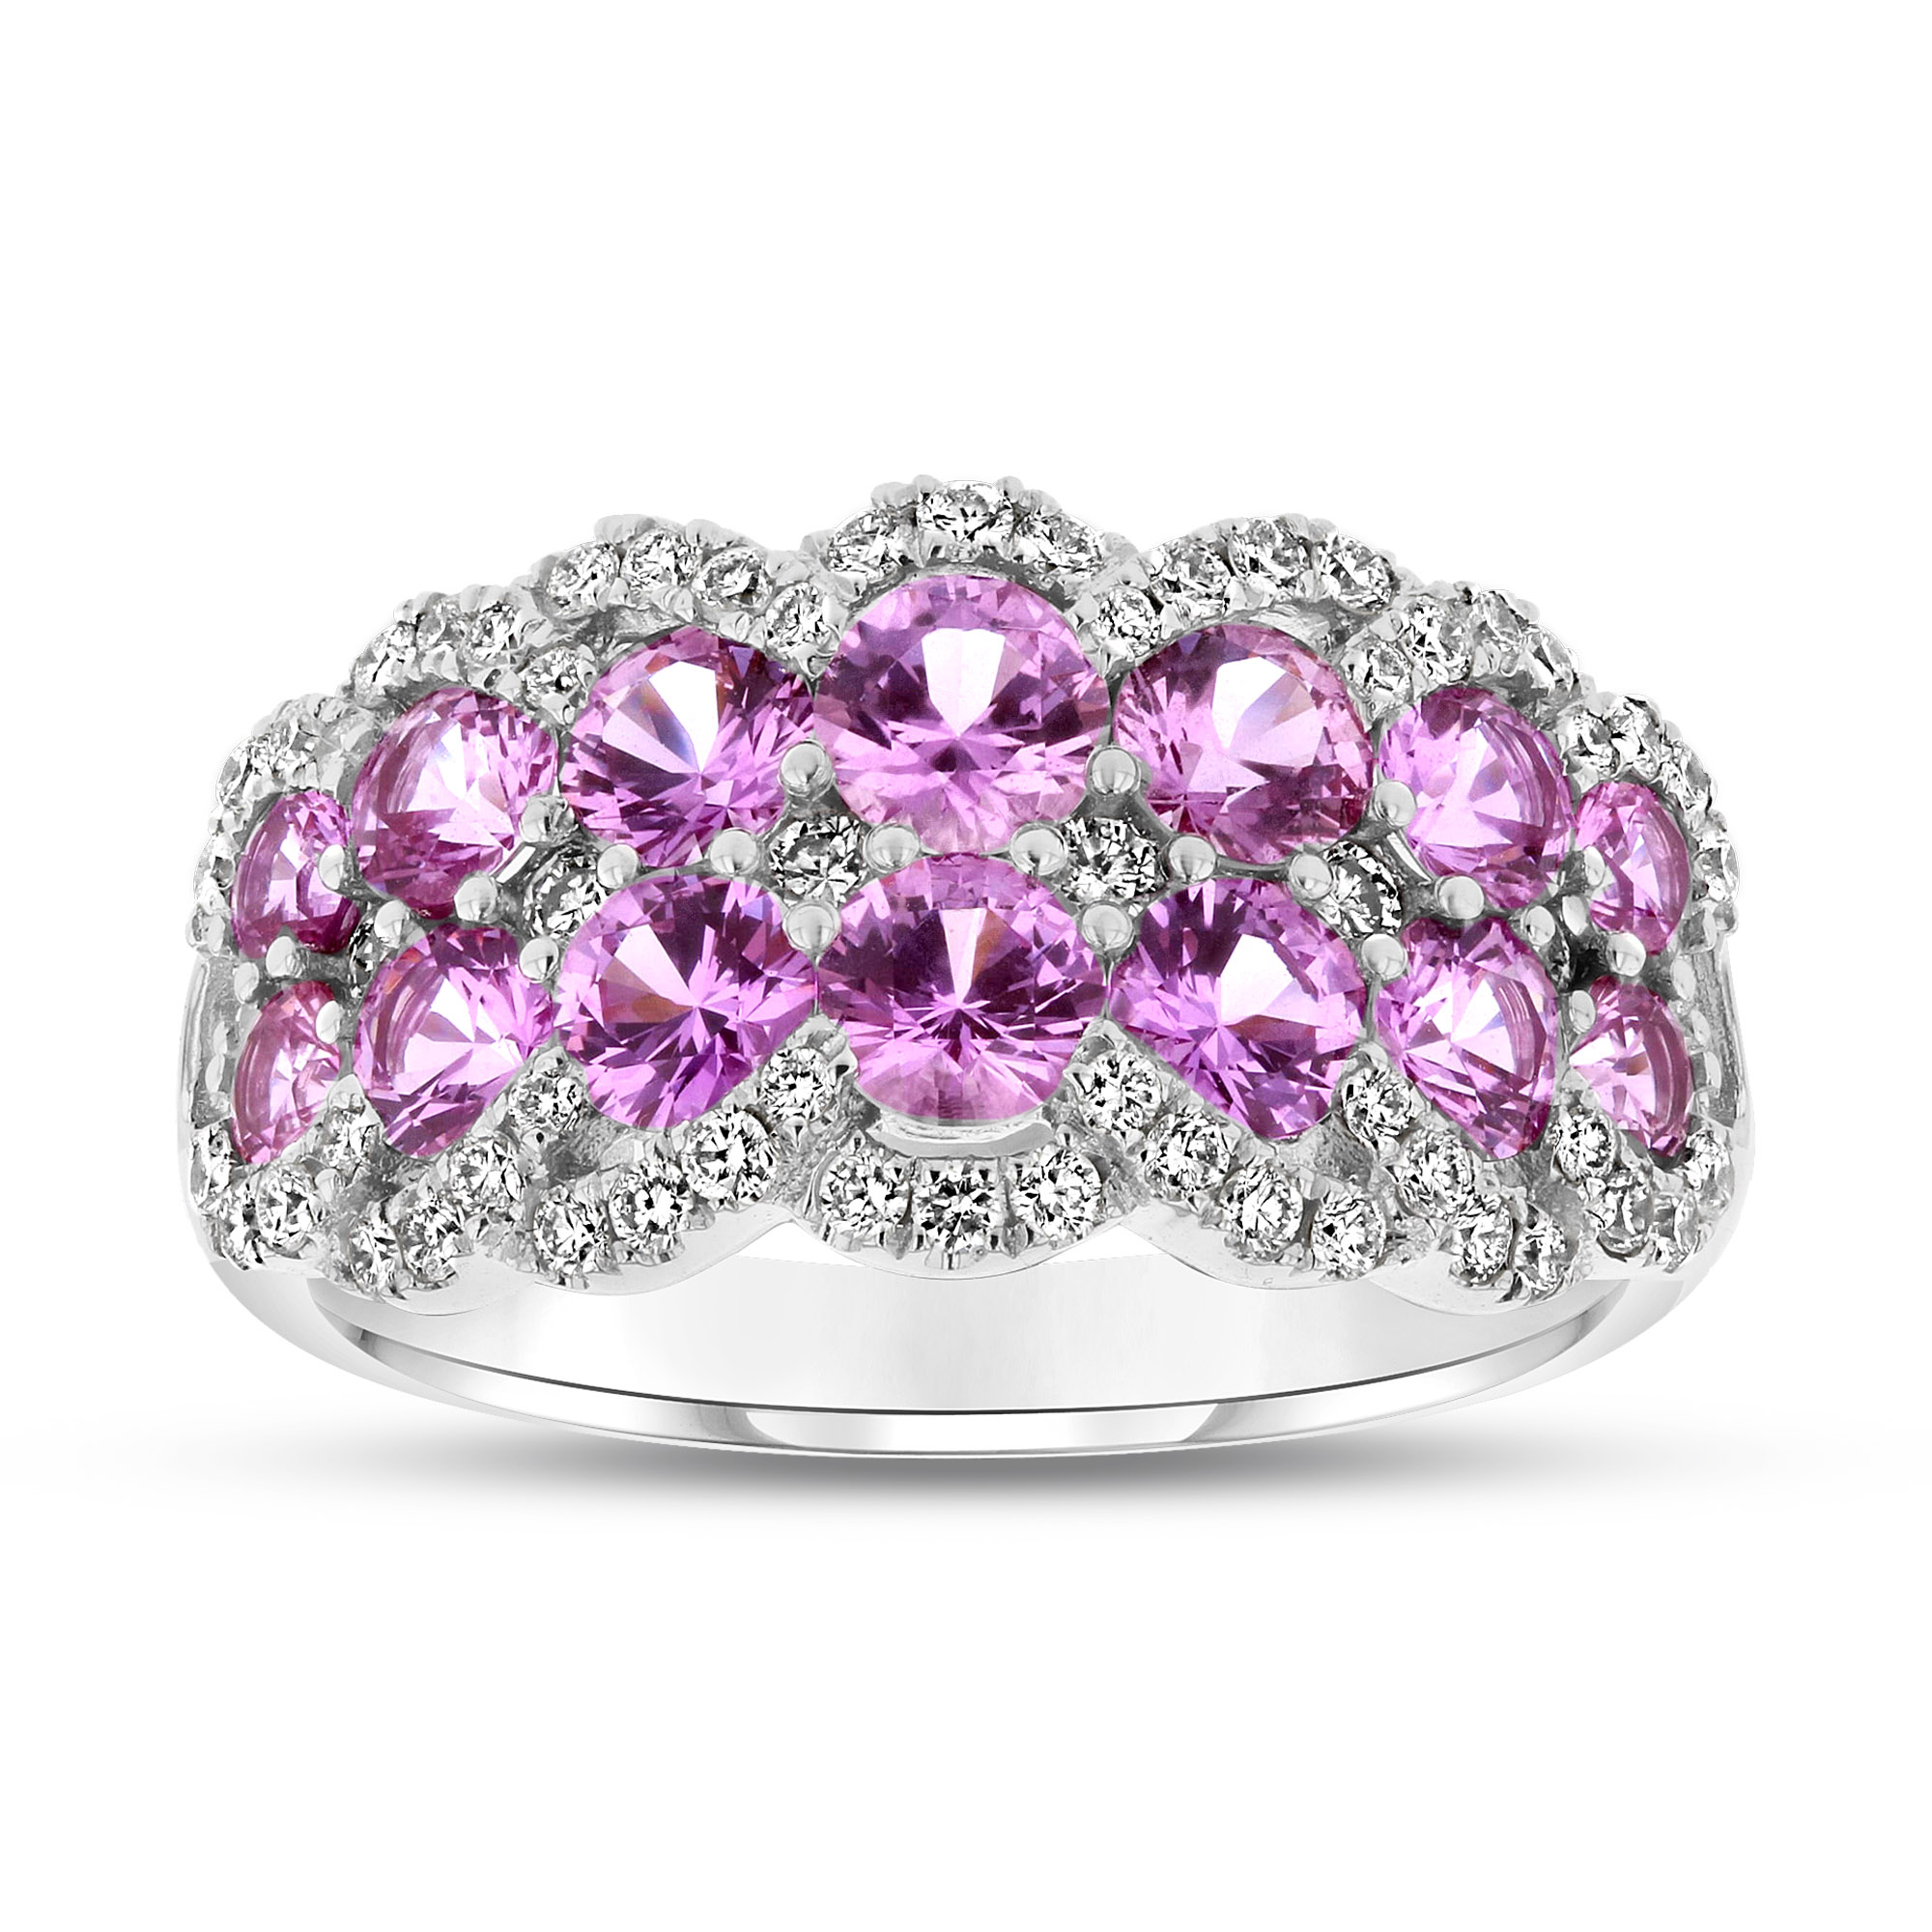 View 2.74ctw Diamond and Pink Sapphire Ring in 18k White Gold